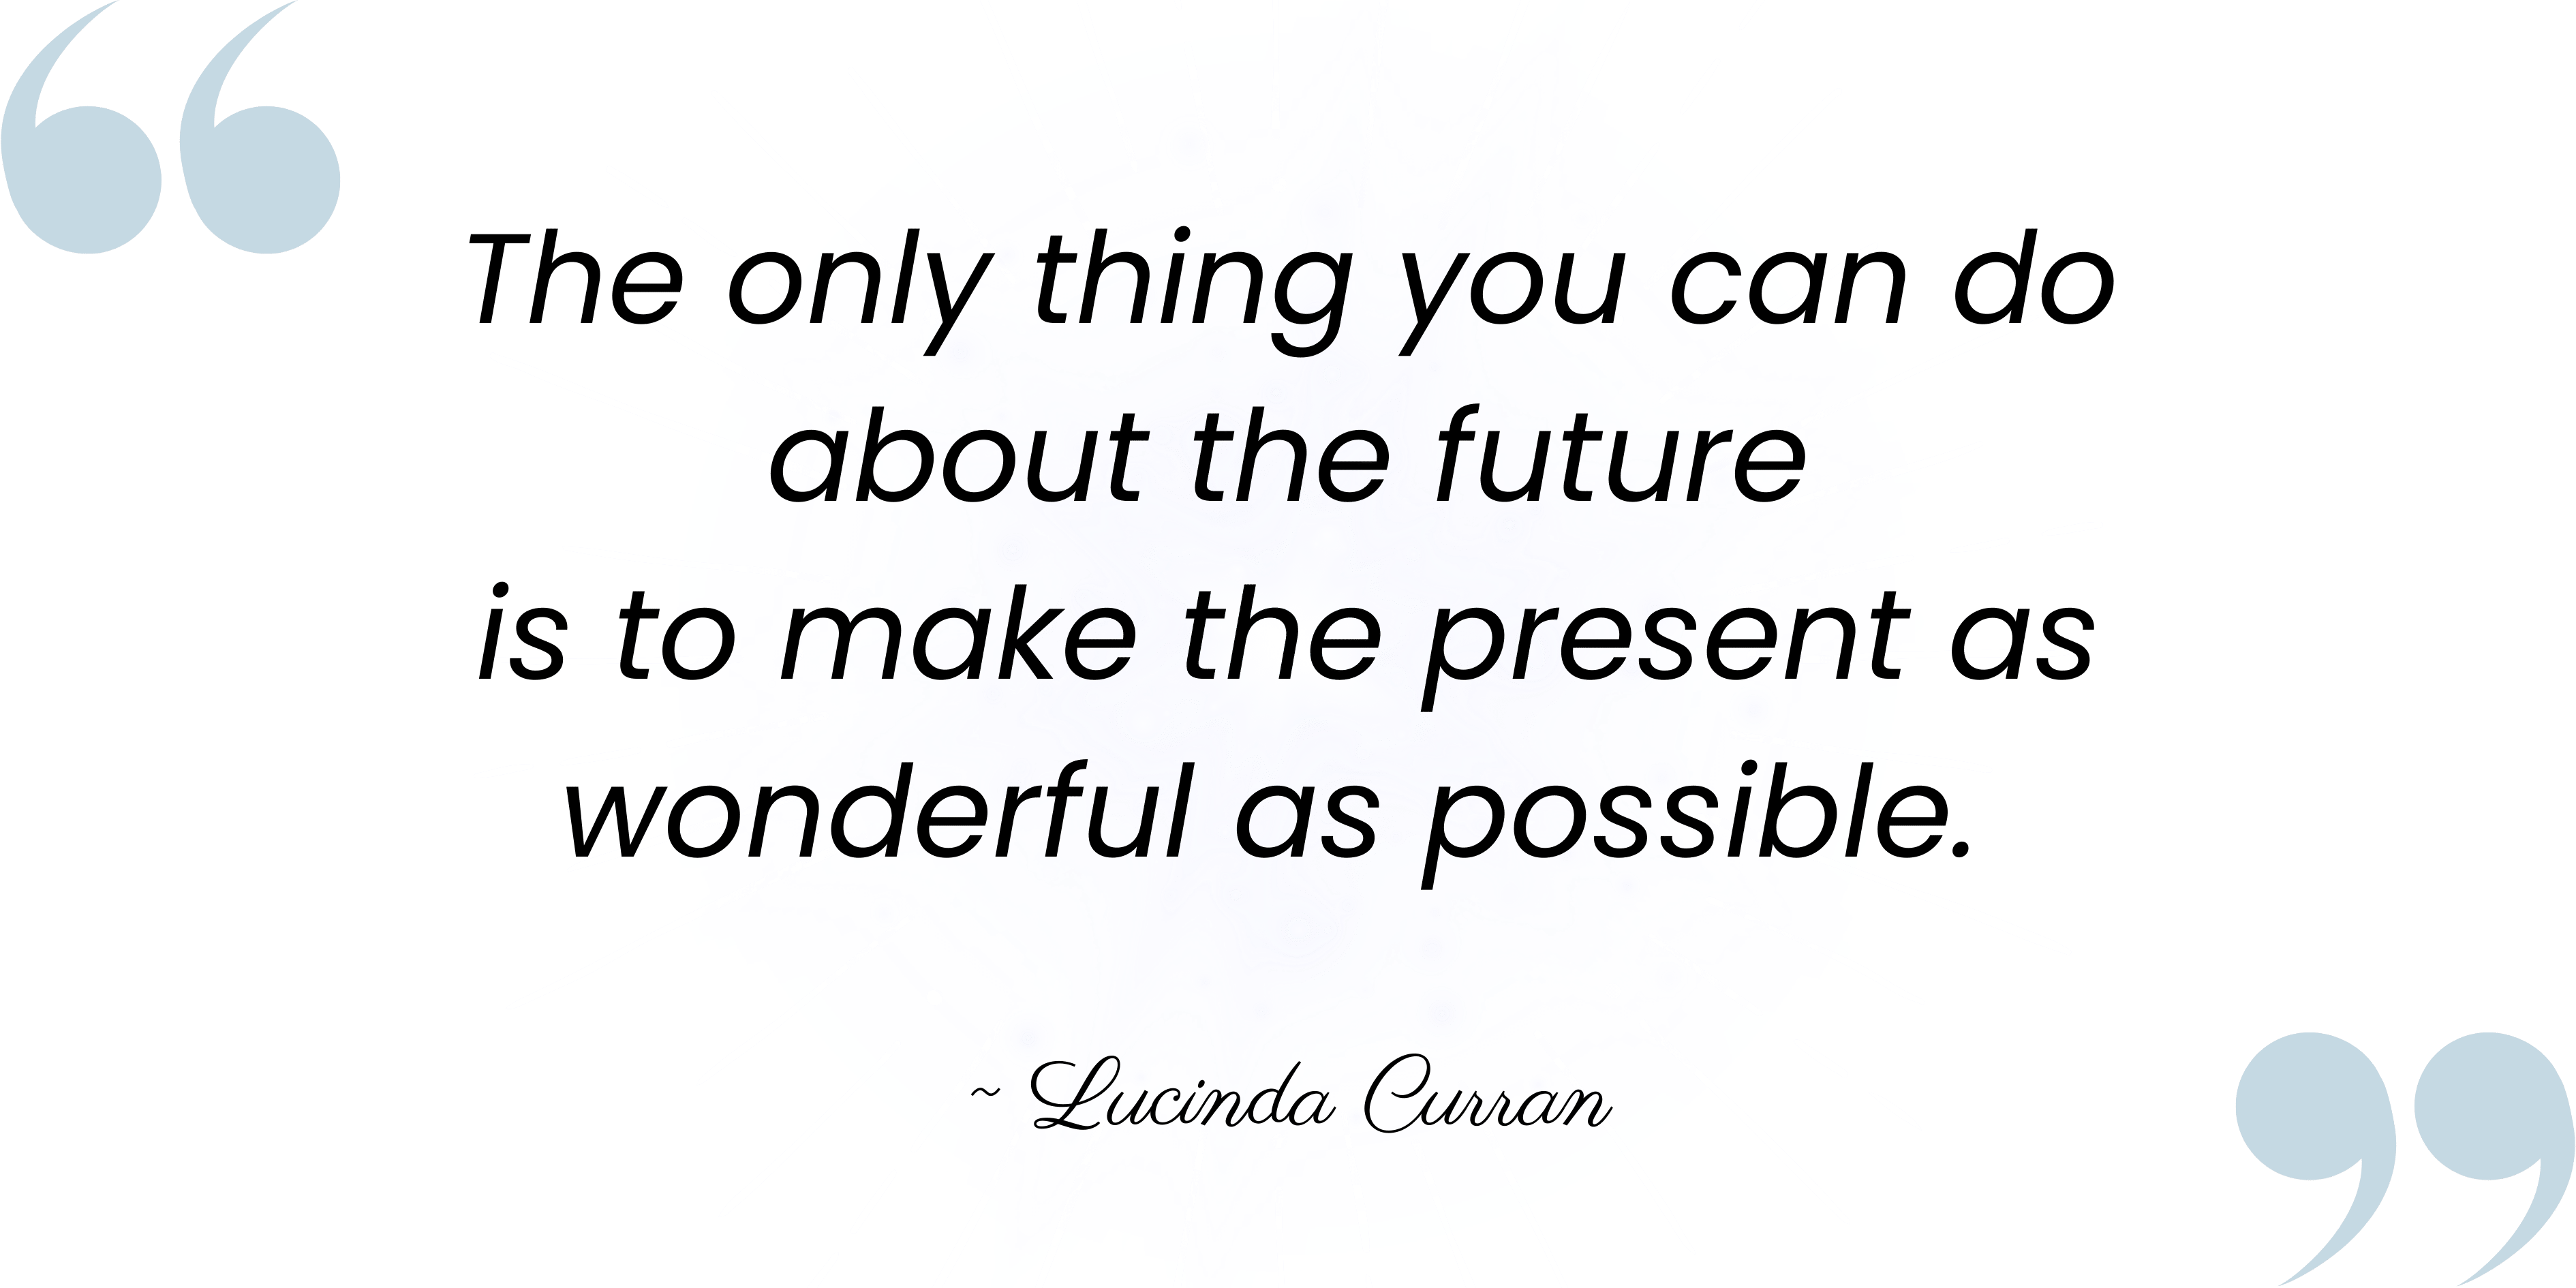 "The only thing you can do about the future is to make the present as wonderful as possible." - quote LucindaCurran.com